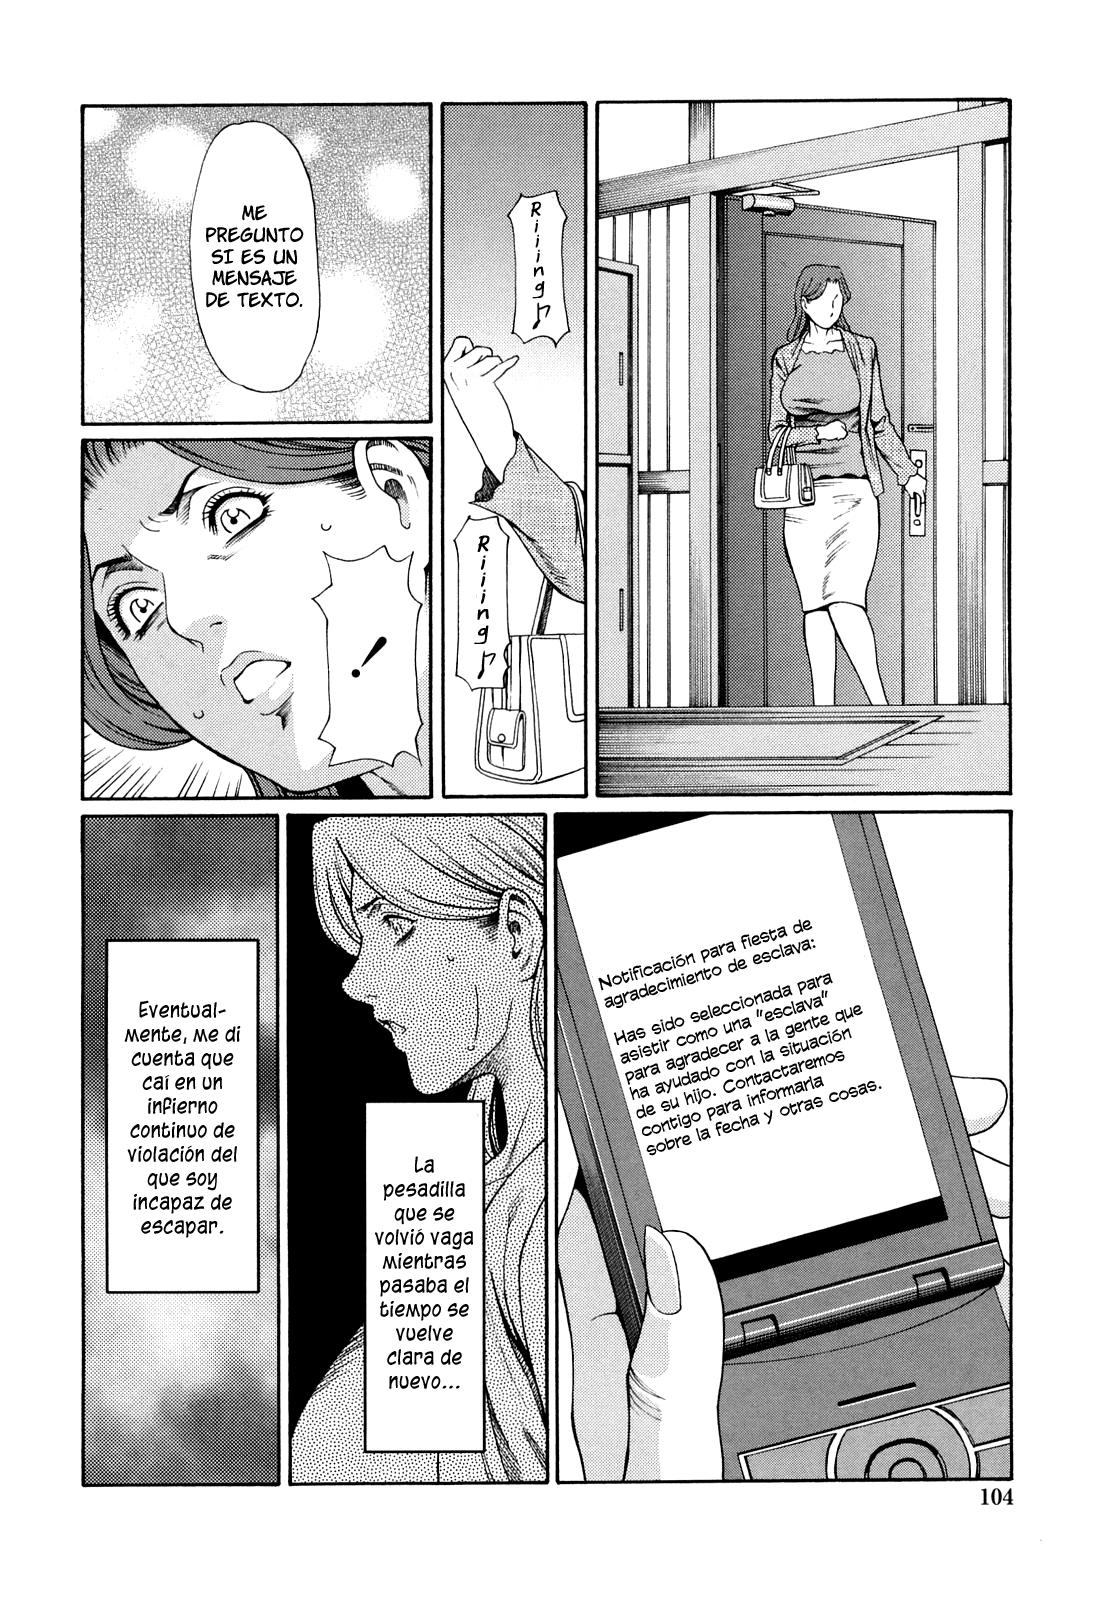 Immorality Love-Hole Completo (Sin Censura) Chapter-7 - 3